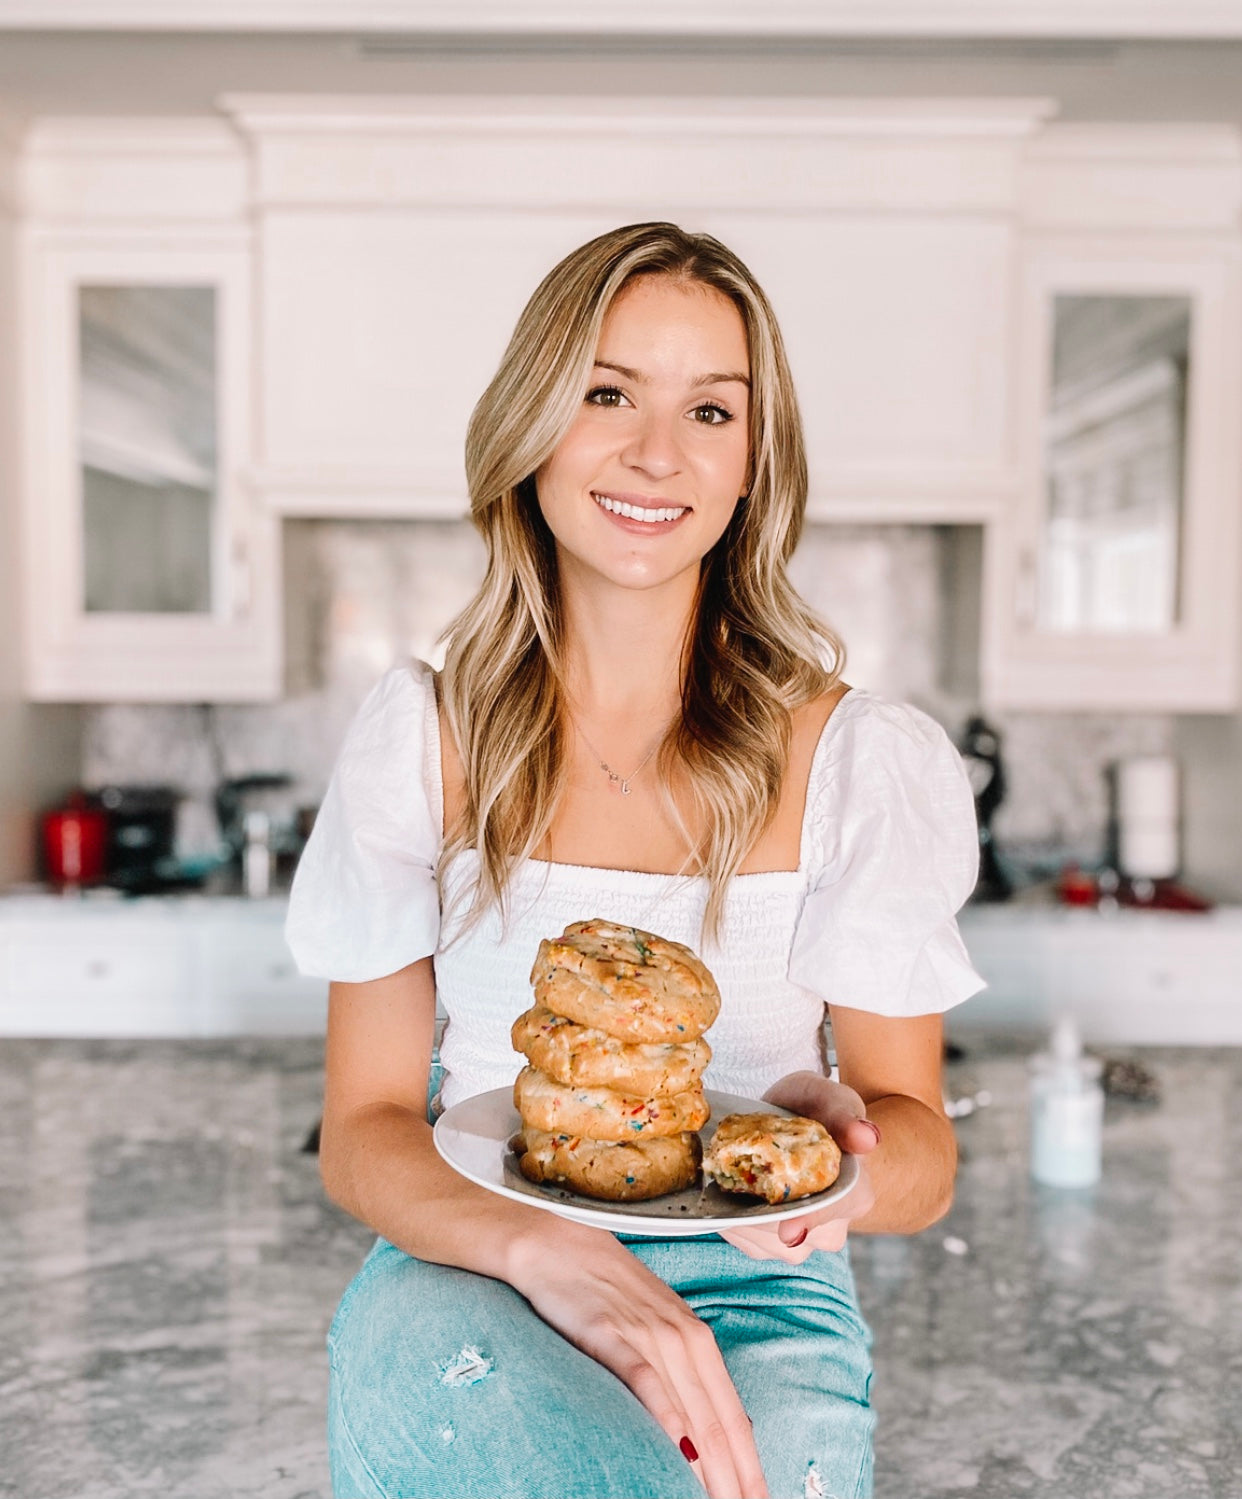 The Milk & Co Cookies Story. About Us. Guelph Gourmet Cookie Company